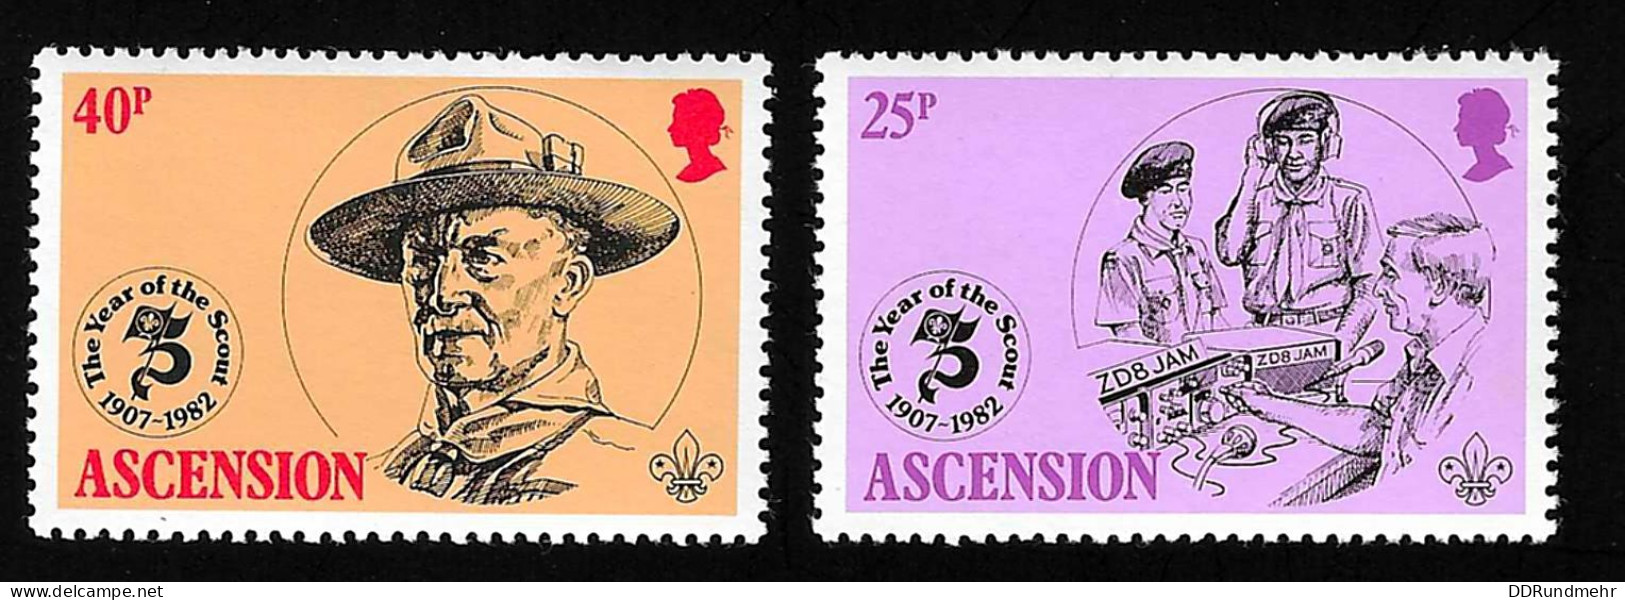 1982 Scouting  Michel AC 308 - 309 Stamp Number AC 303 - 304 Yvert Et Tellier AC 305 - 306 Xx MNH - Ascension